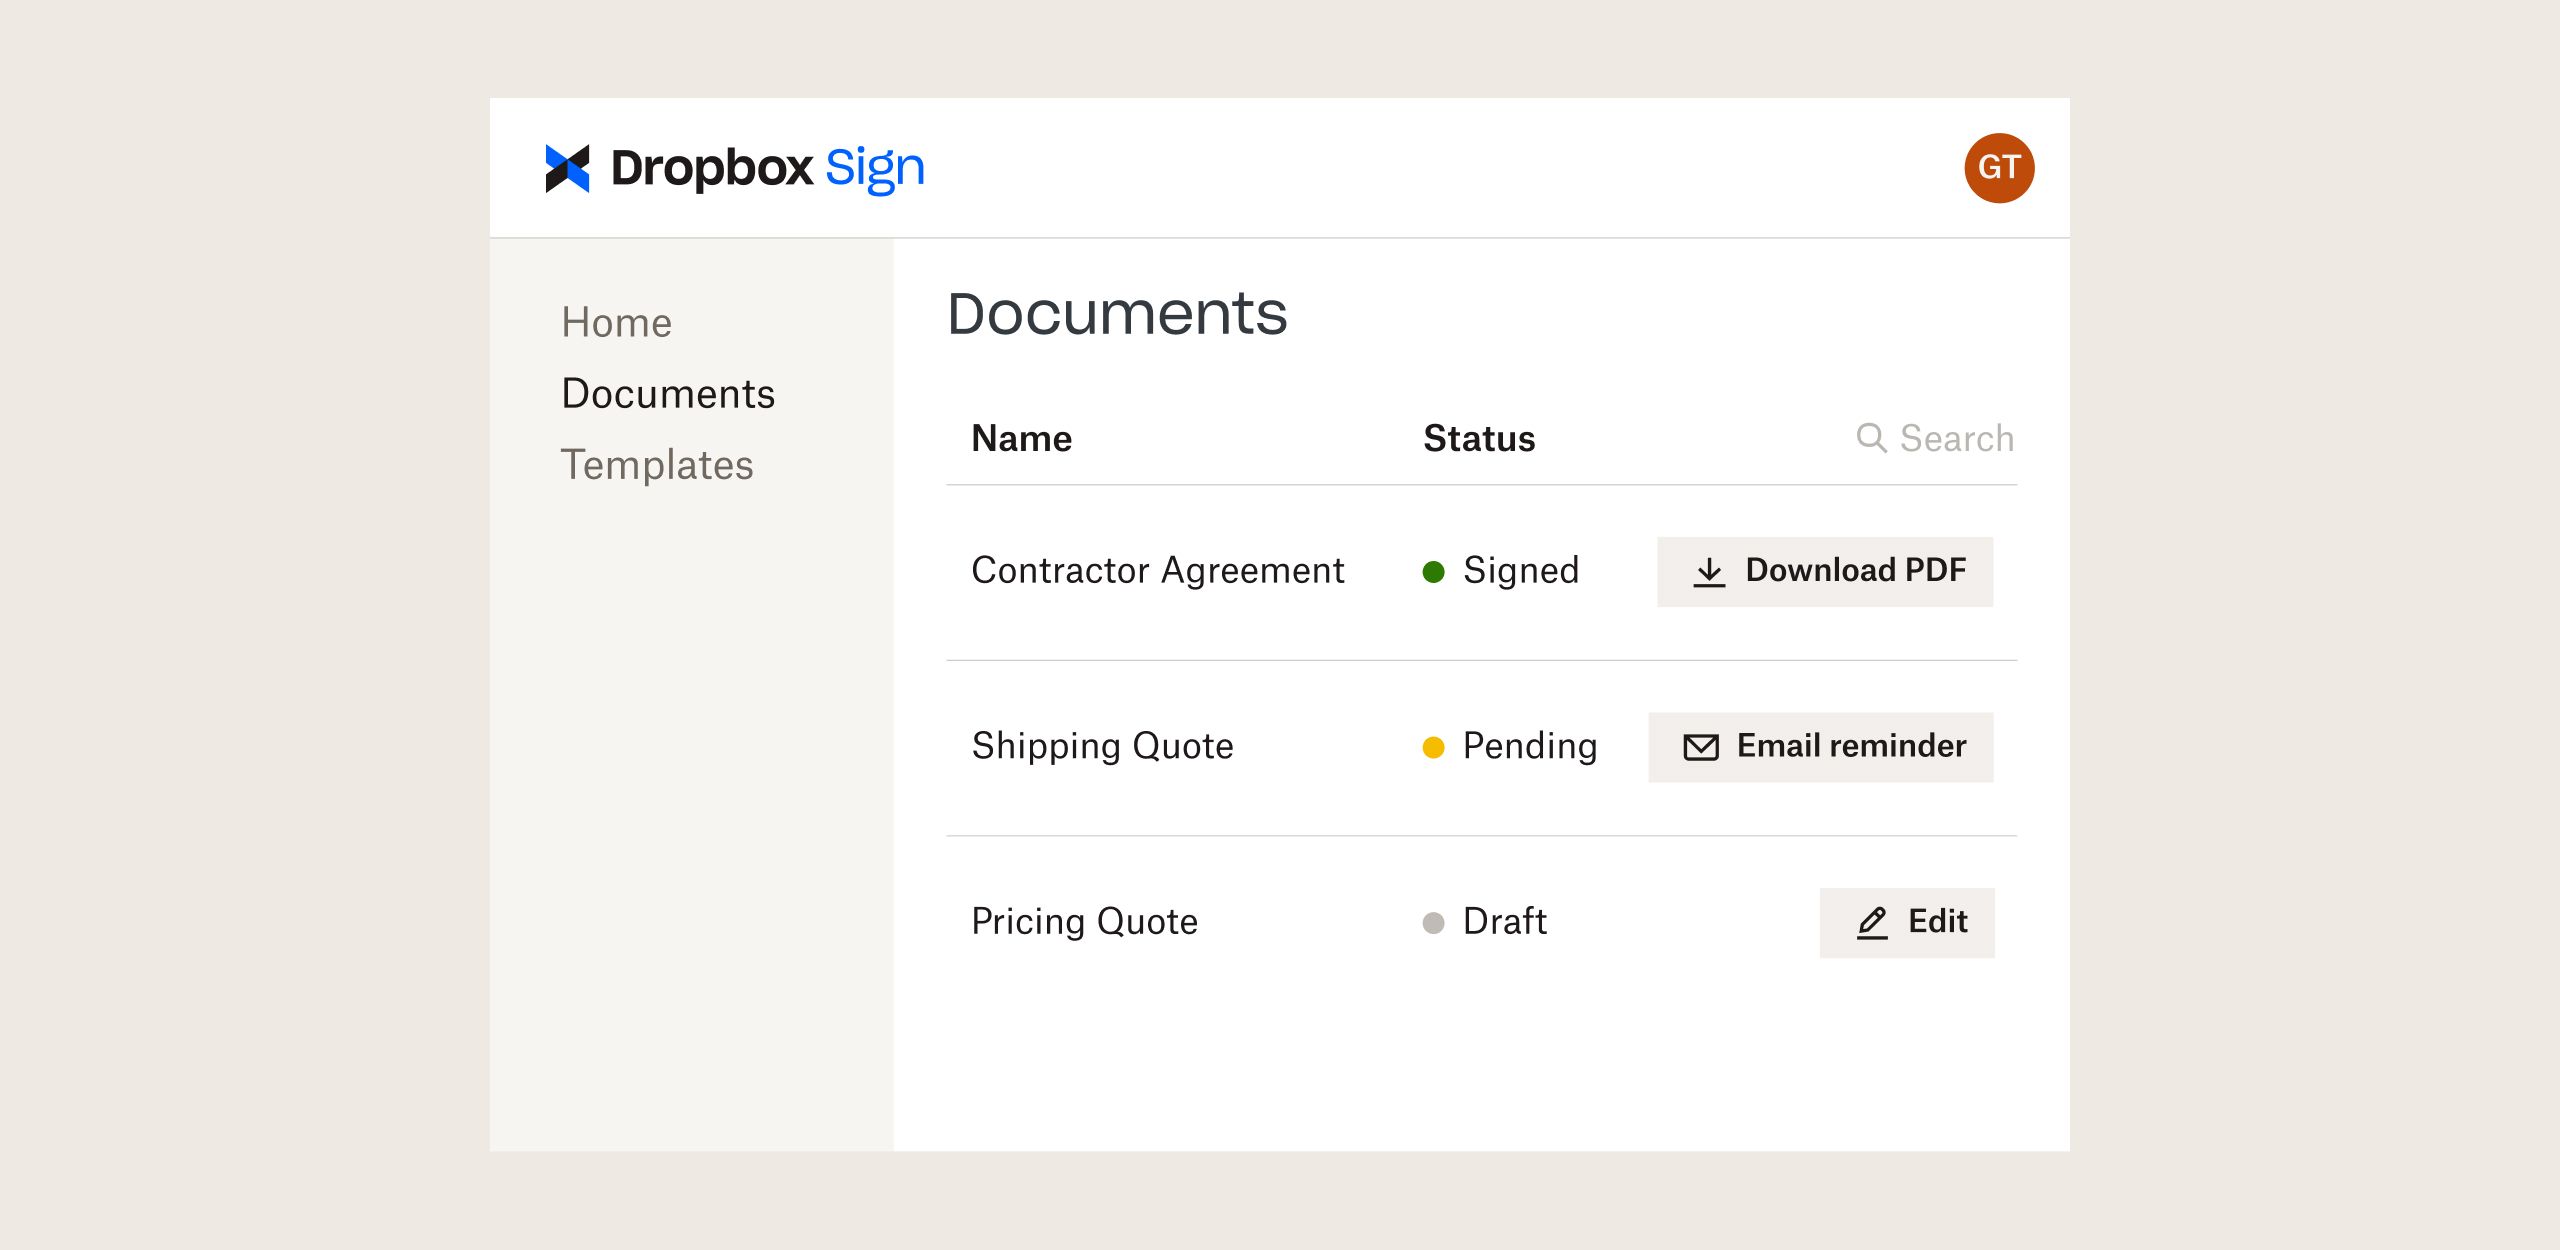 Dropbox Sign interface with options to download, email and edit files